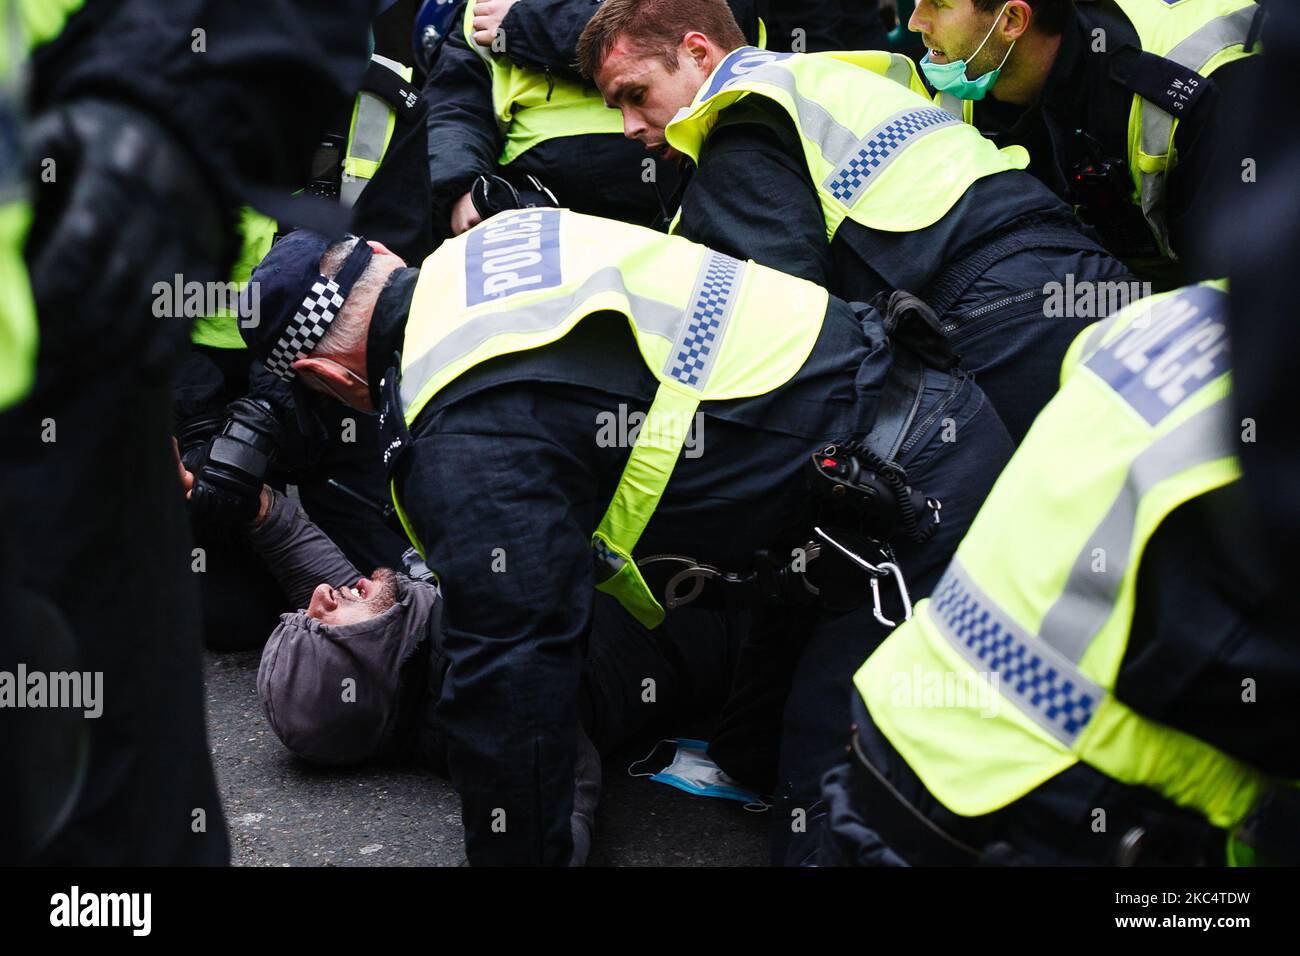 Police officers pin anti-lockdown activists to the ground on Regent Street during a demonstration in London, England, on November 28, 2020. In an evening update the Metropolitan Police announced it had made 155 arrests over the course of the day's demonstrations, for offences including breaches of coronavirus regulations, assault on police and possession of drugs. London is to return to 'Tier 2' or 'high alert' covid-19 restrictions once the current England-wide coronavirus lockdown ends next Wednesday. All three of the tiers, assigned to local authorities across England, have been strengthene Stock Photo